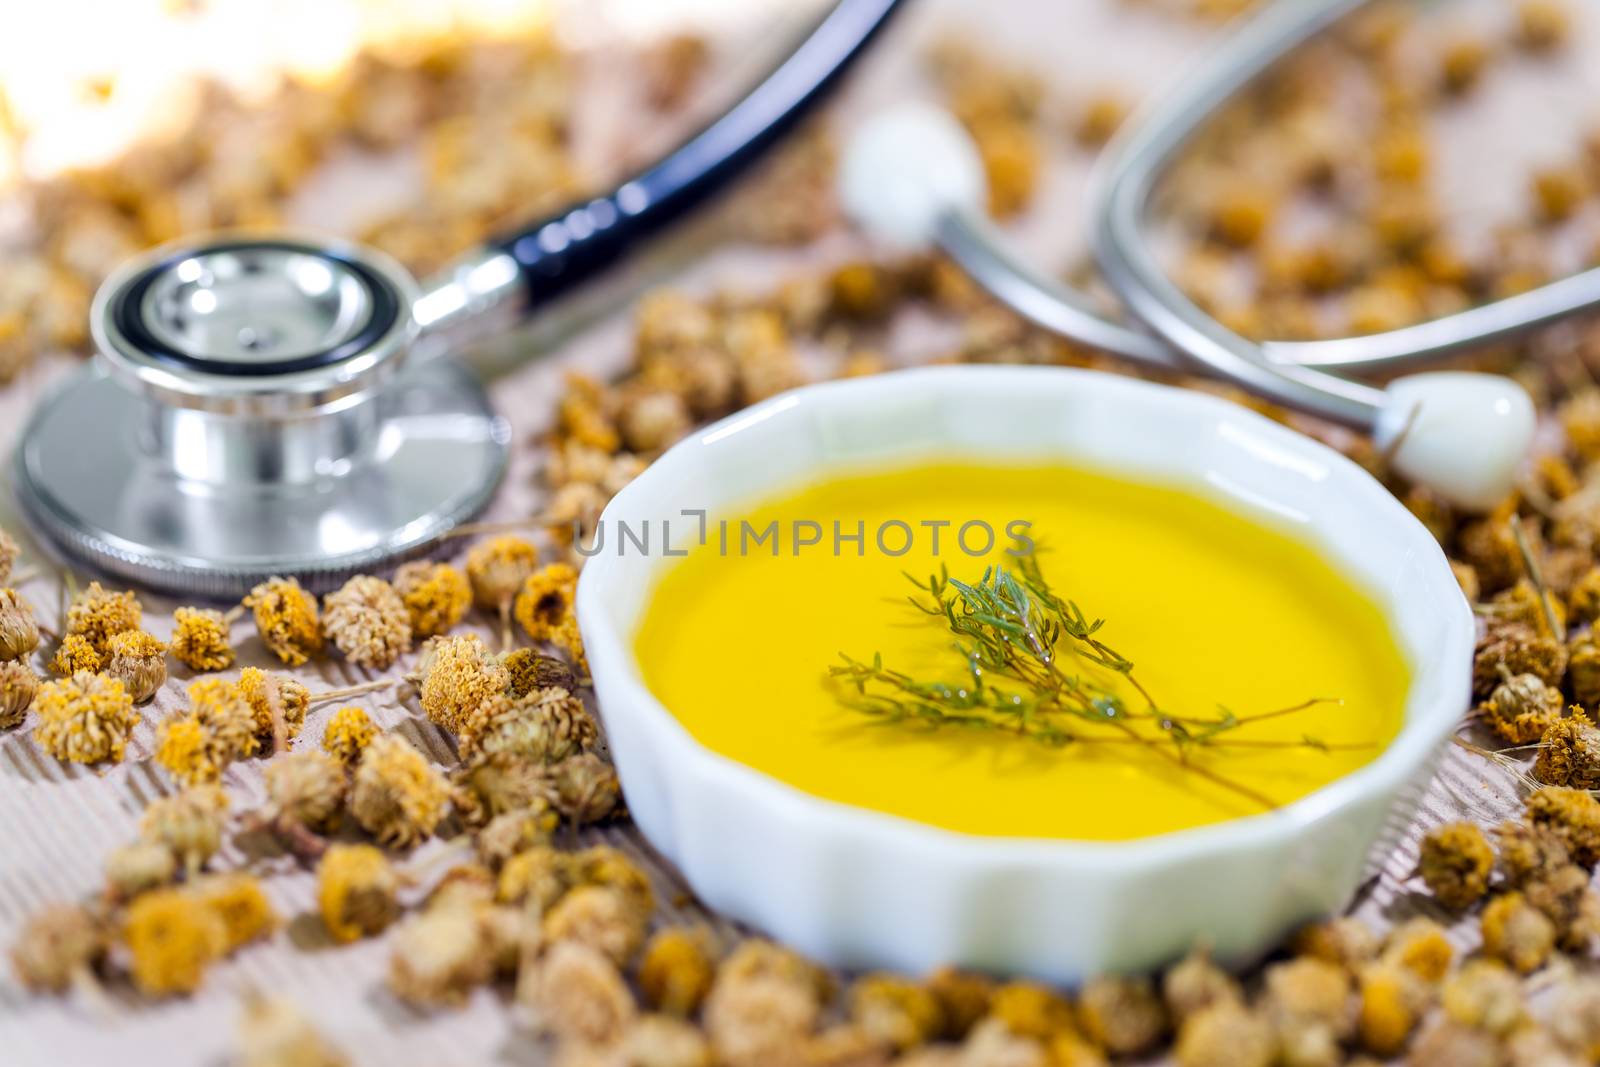 Macro close up of white ceramic bowl with Essential oil and medical stethoscope in background.